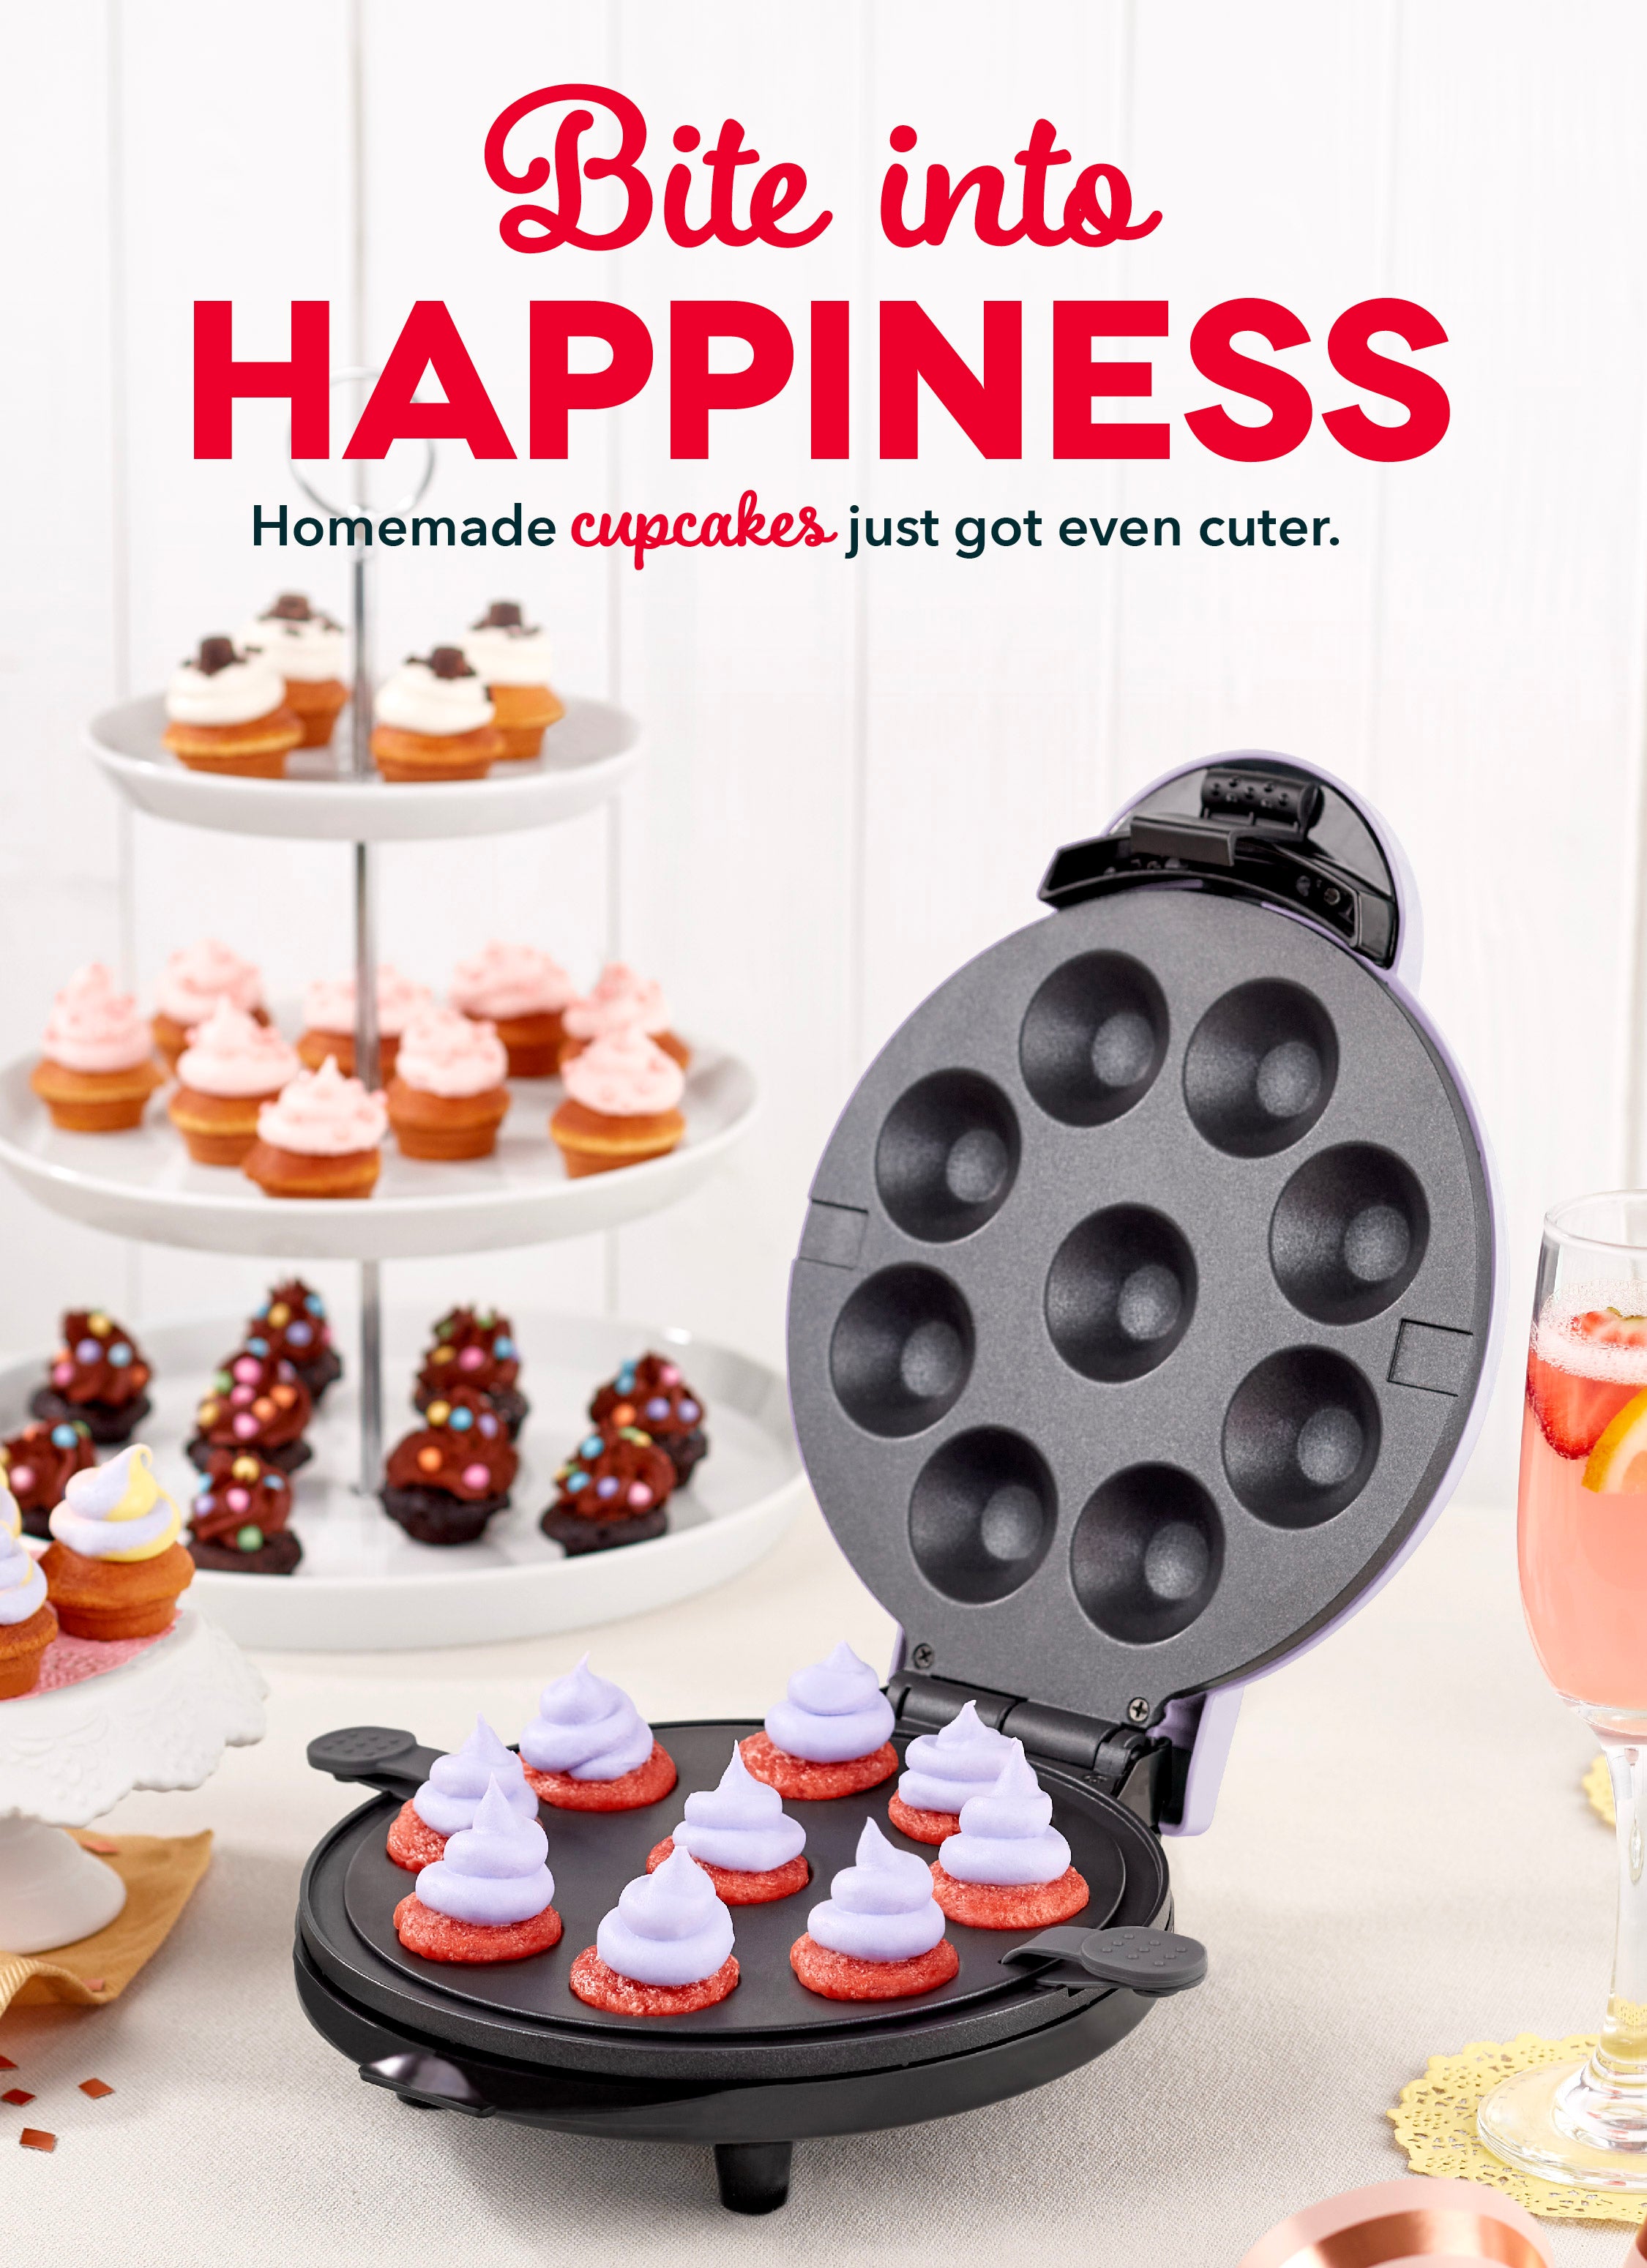 Bite into happiness! Homemade cupcakes just got cuter.